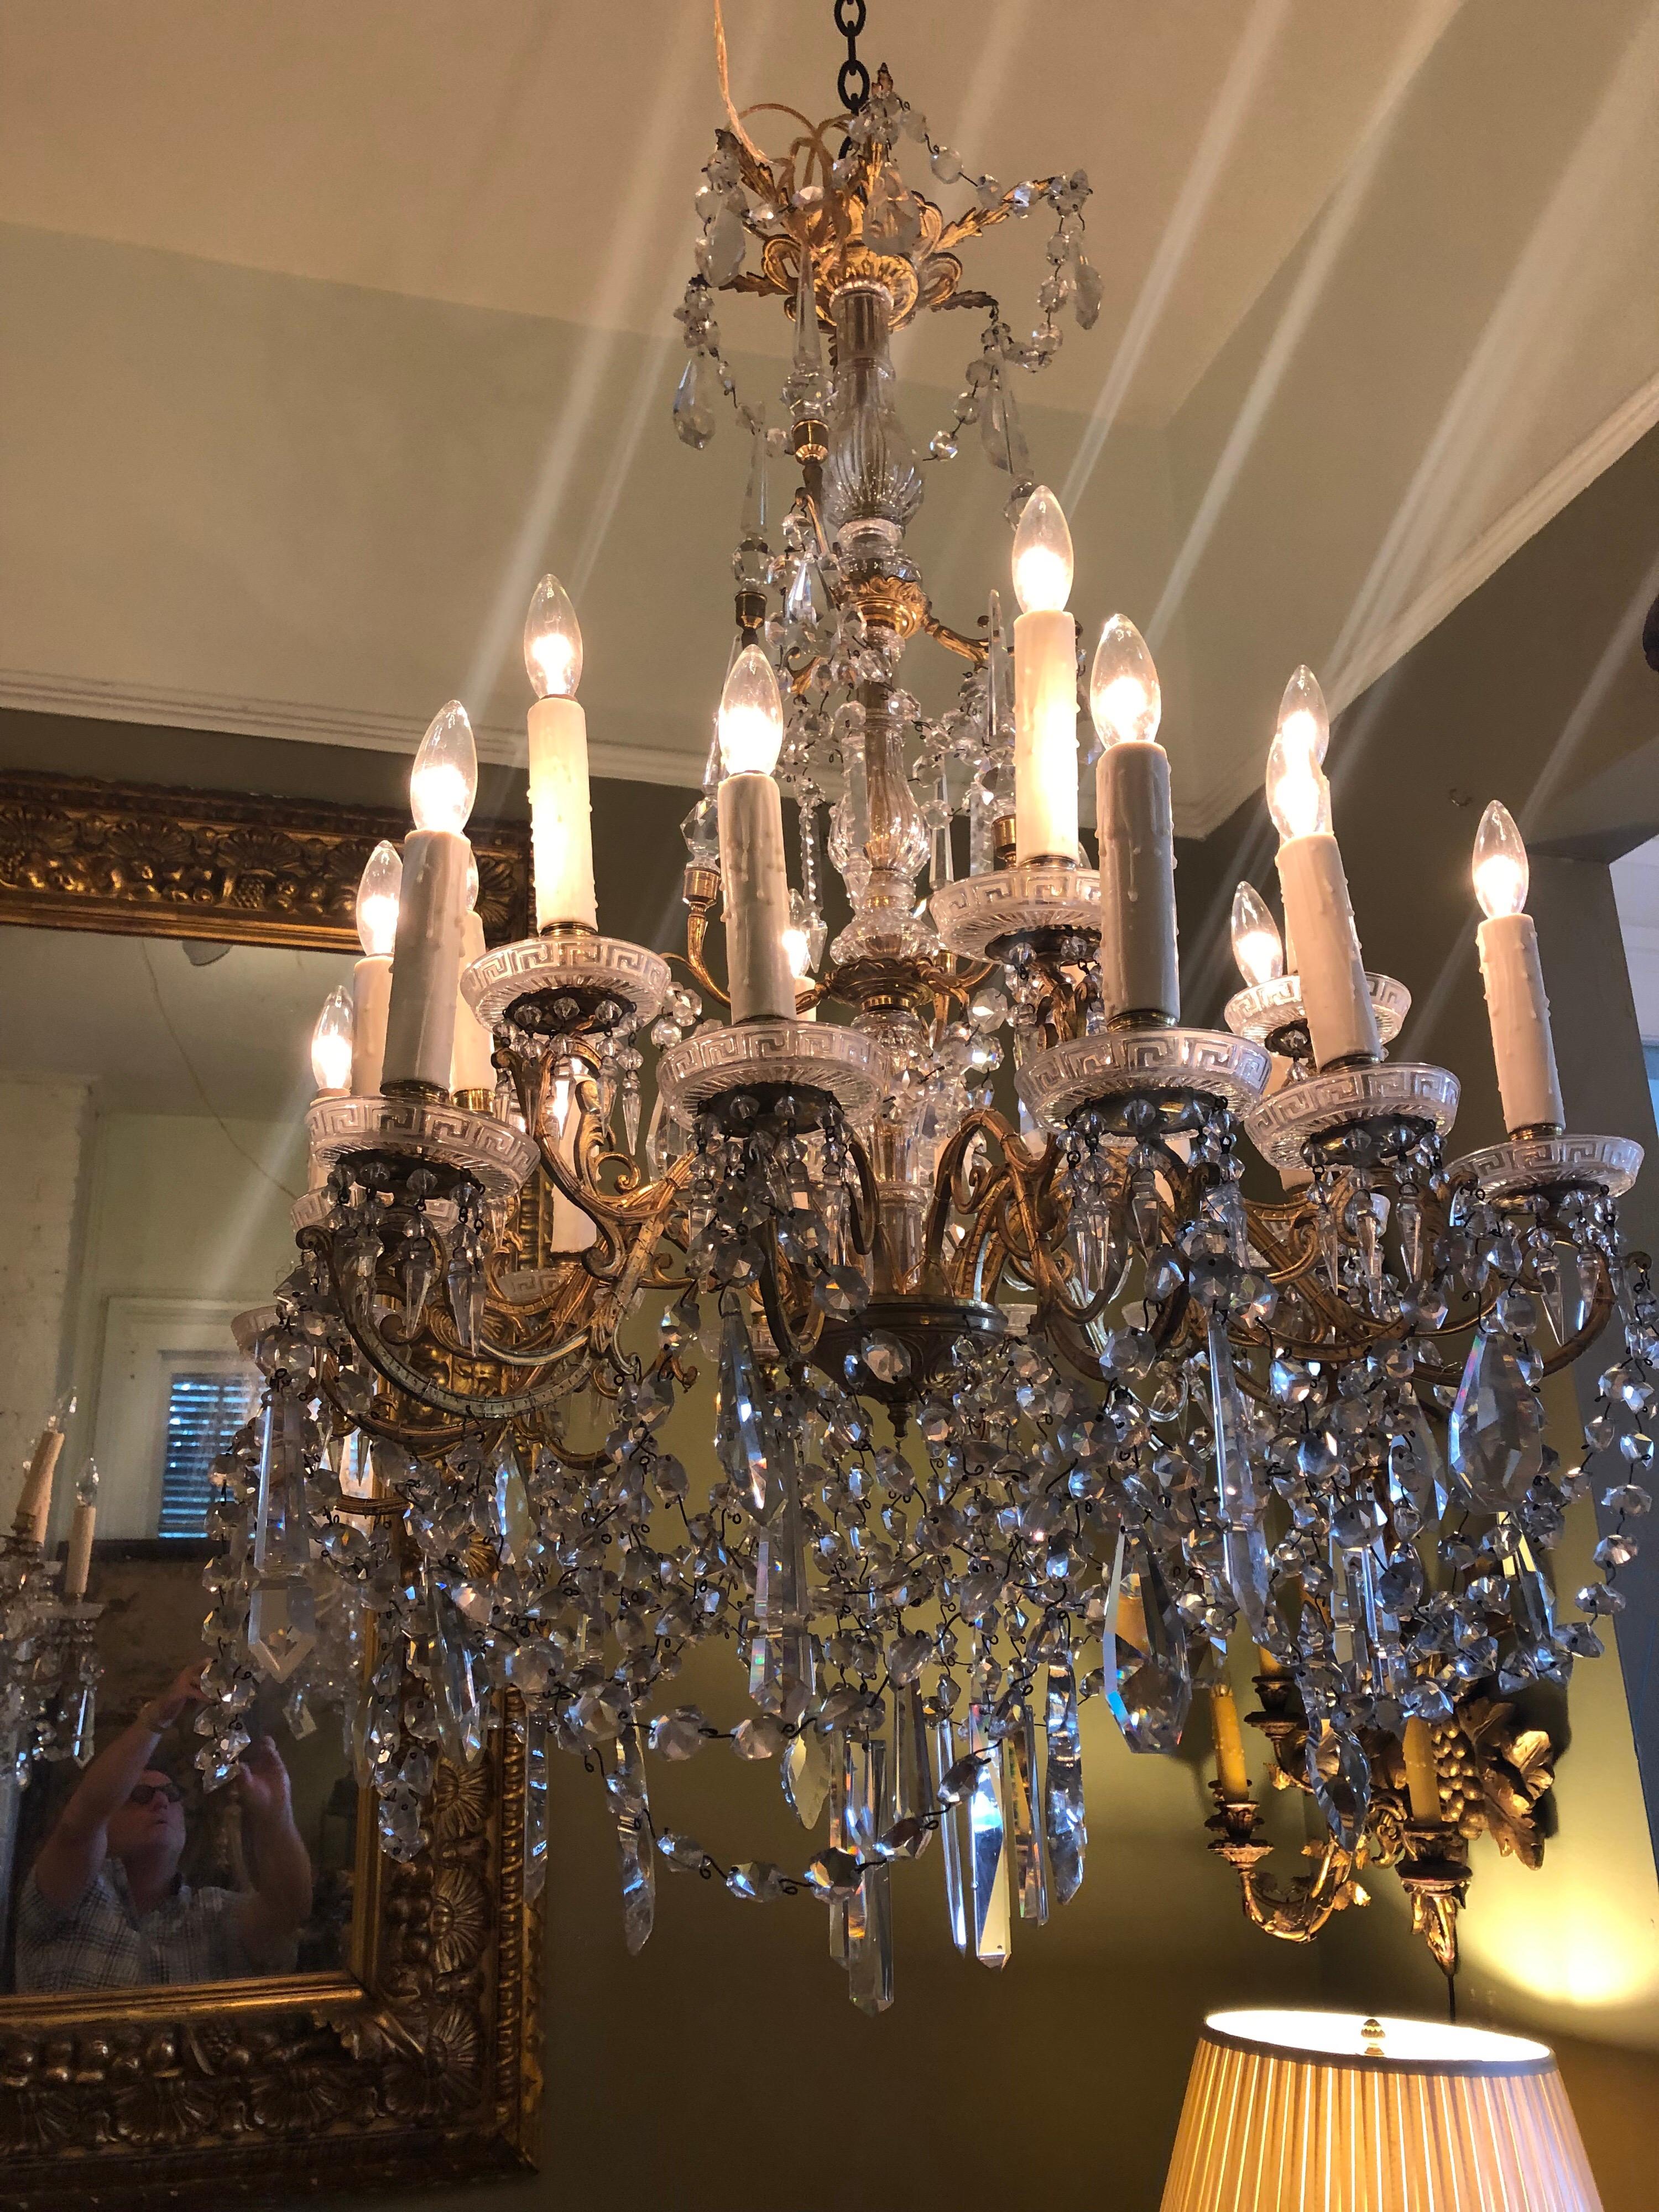 Pair of French gilt bronze and Baccarat crystal chandeliers with 18 lights each. Rewired. Baccarat crystals on gilt bronze armature.